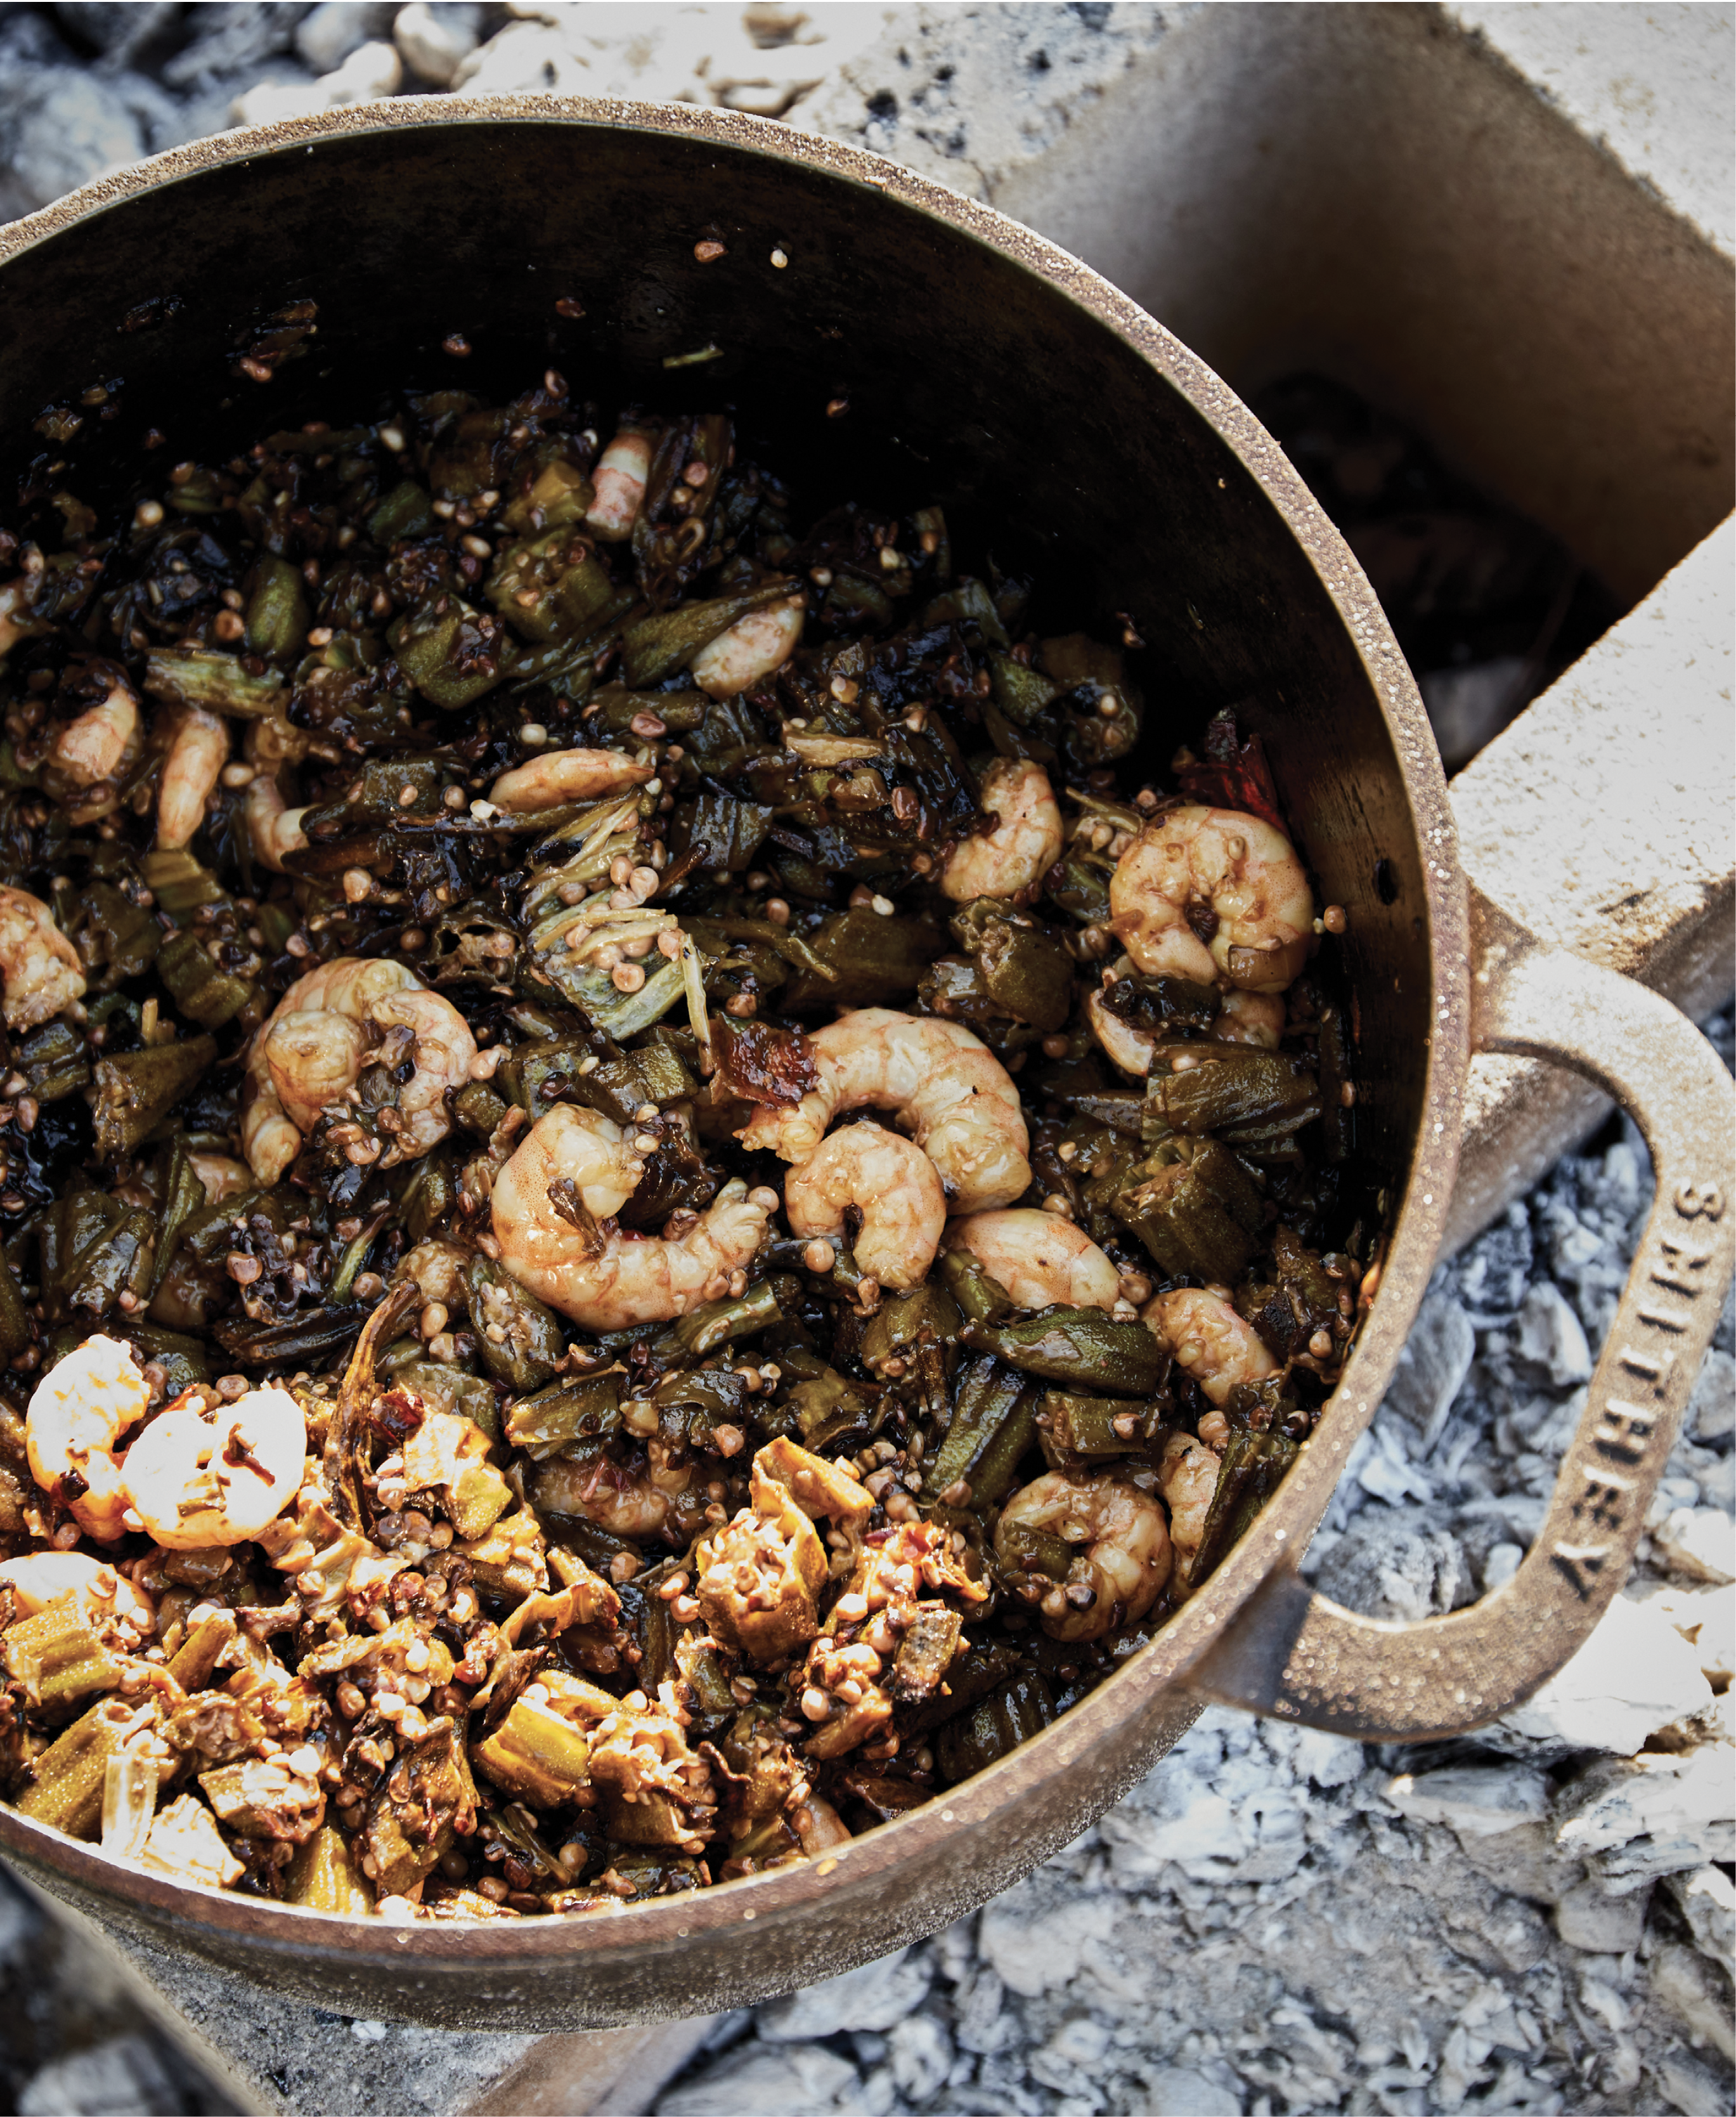 Okra, collards, and shrimp  develop a subtle smoky flavor while being cooked over coals.